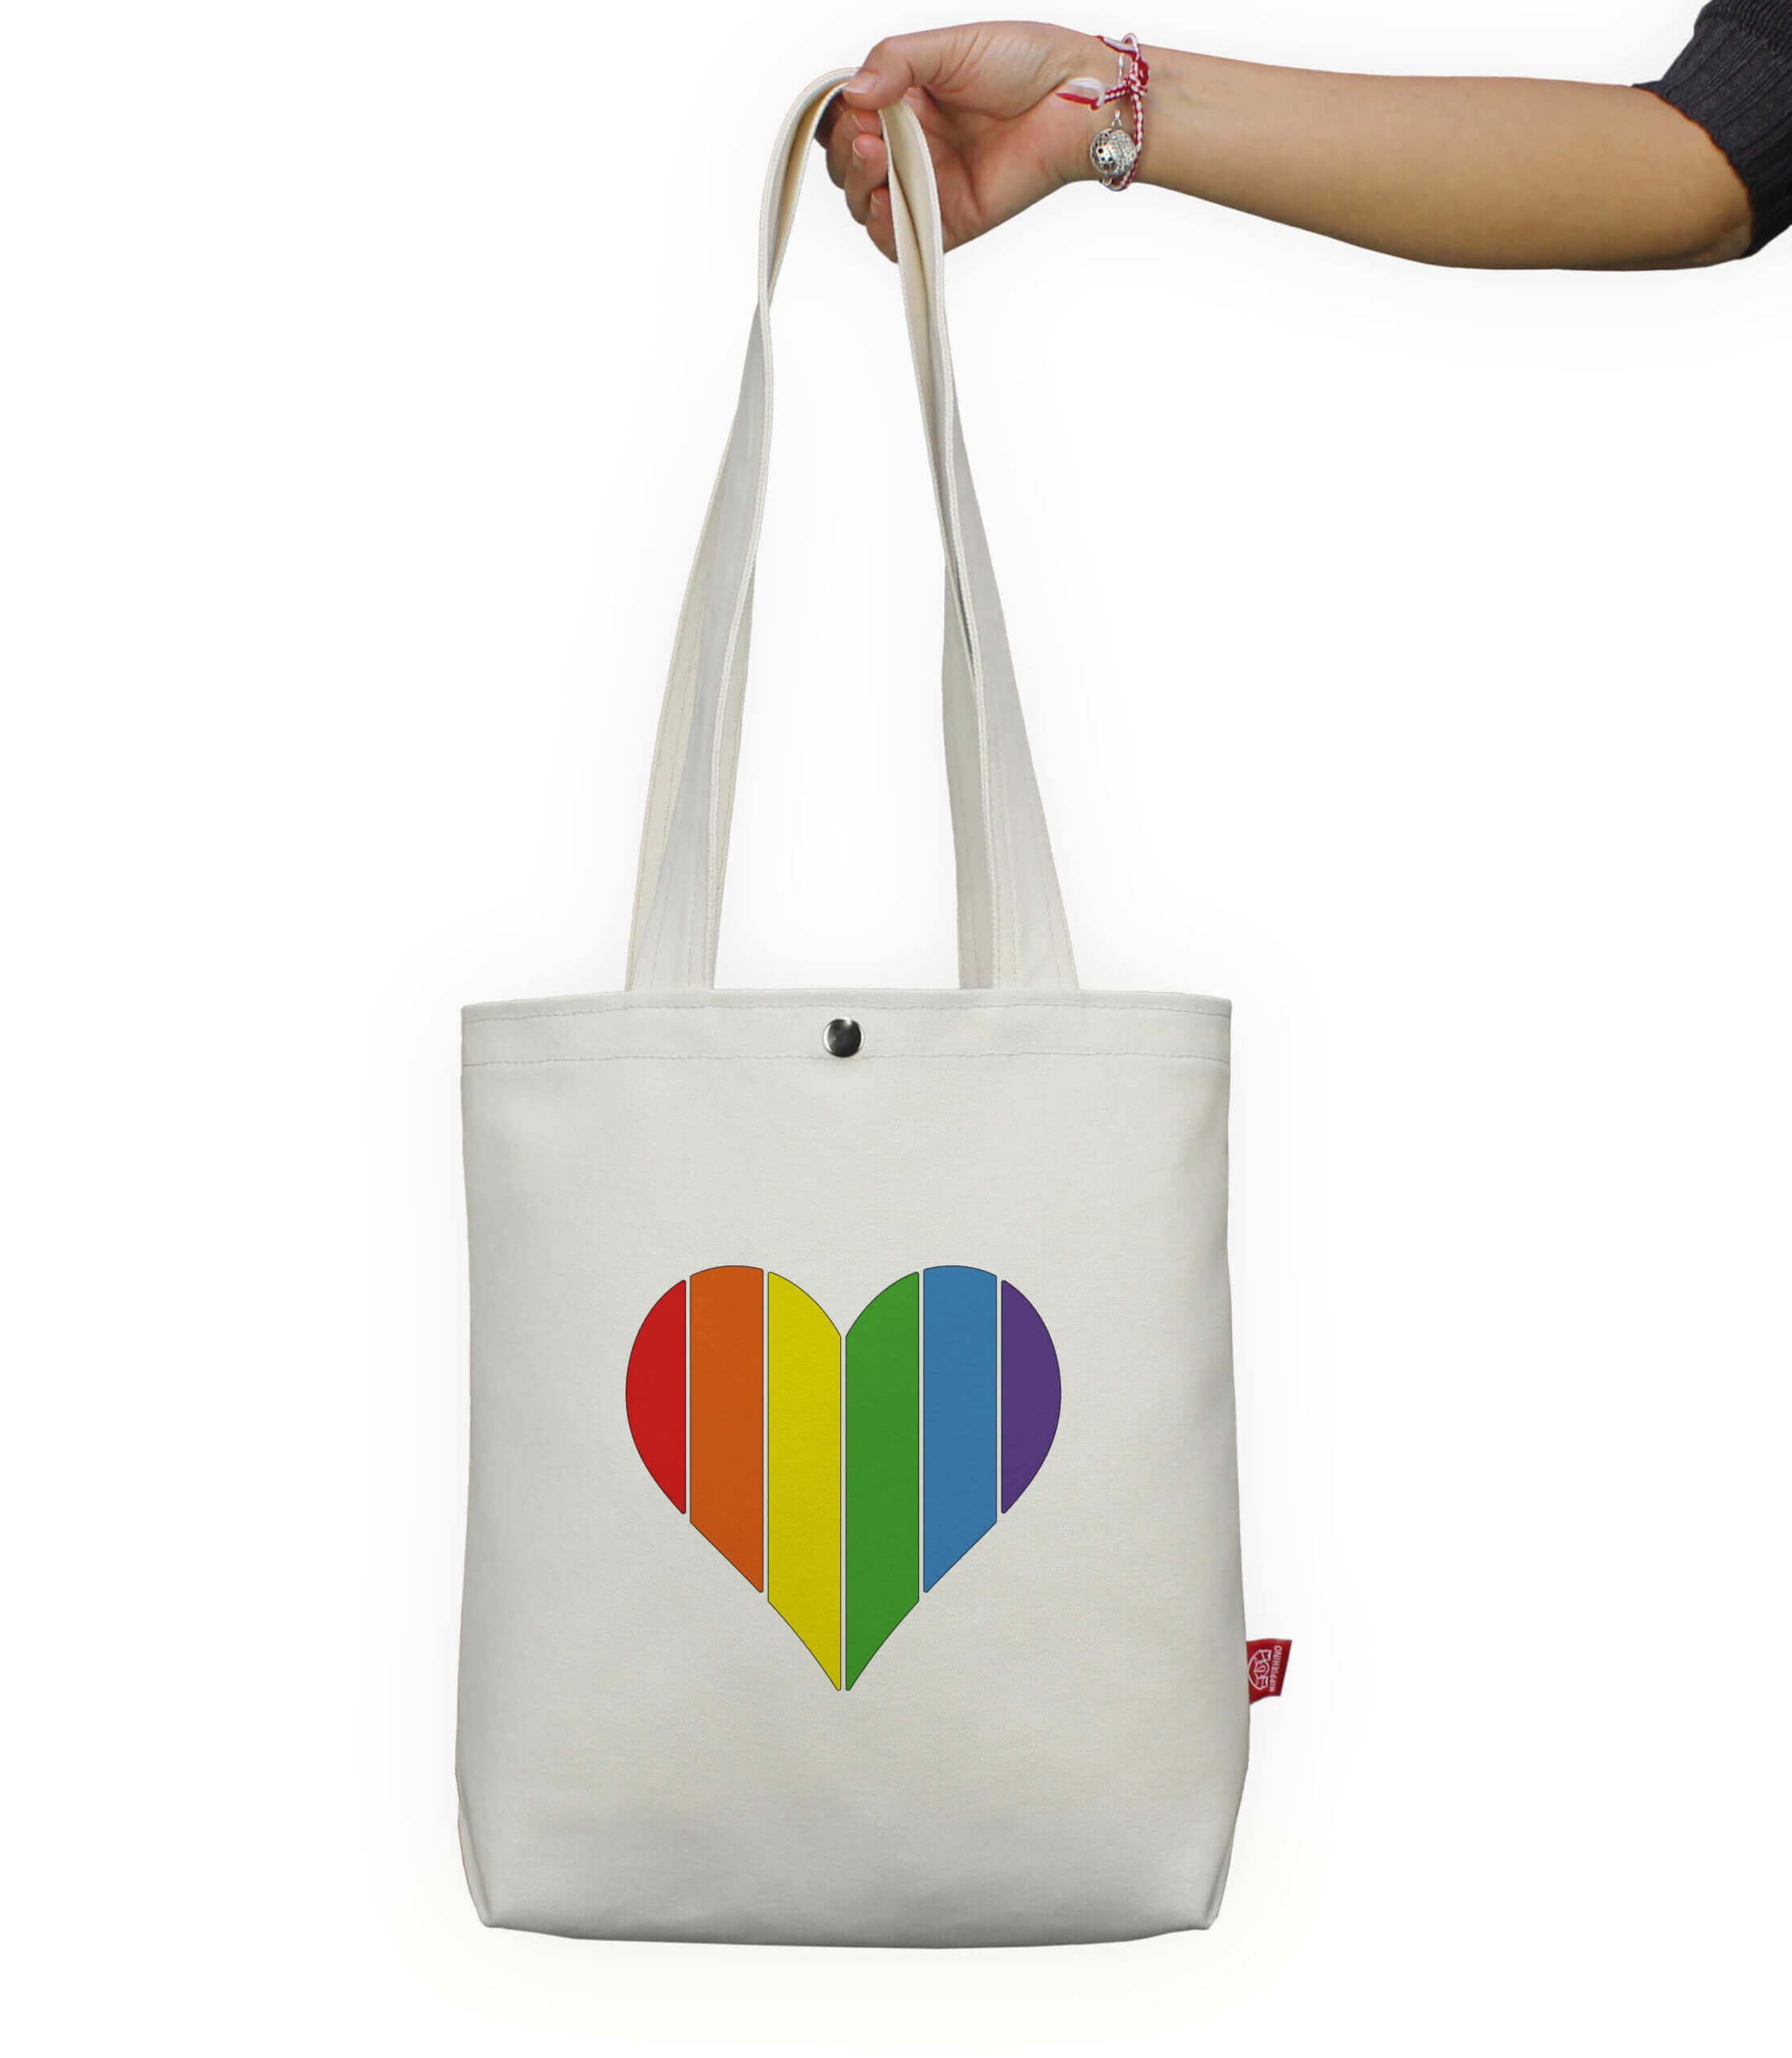 Shop LGBTQ Pride Tote Bag - Show Your Support Today!